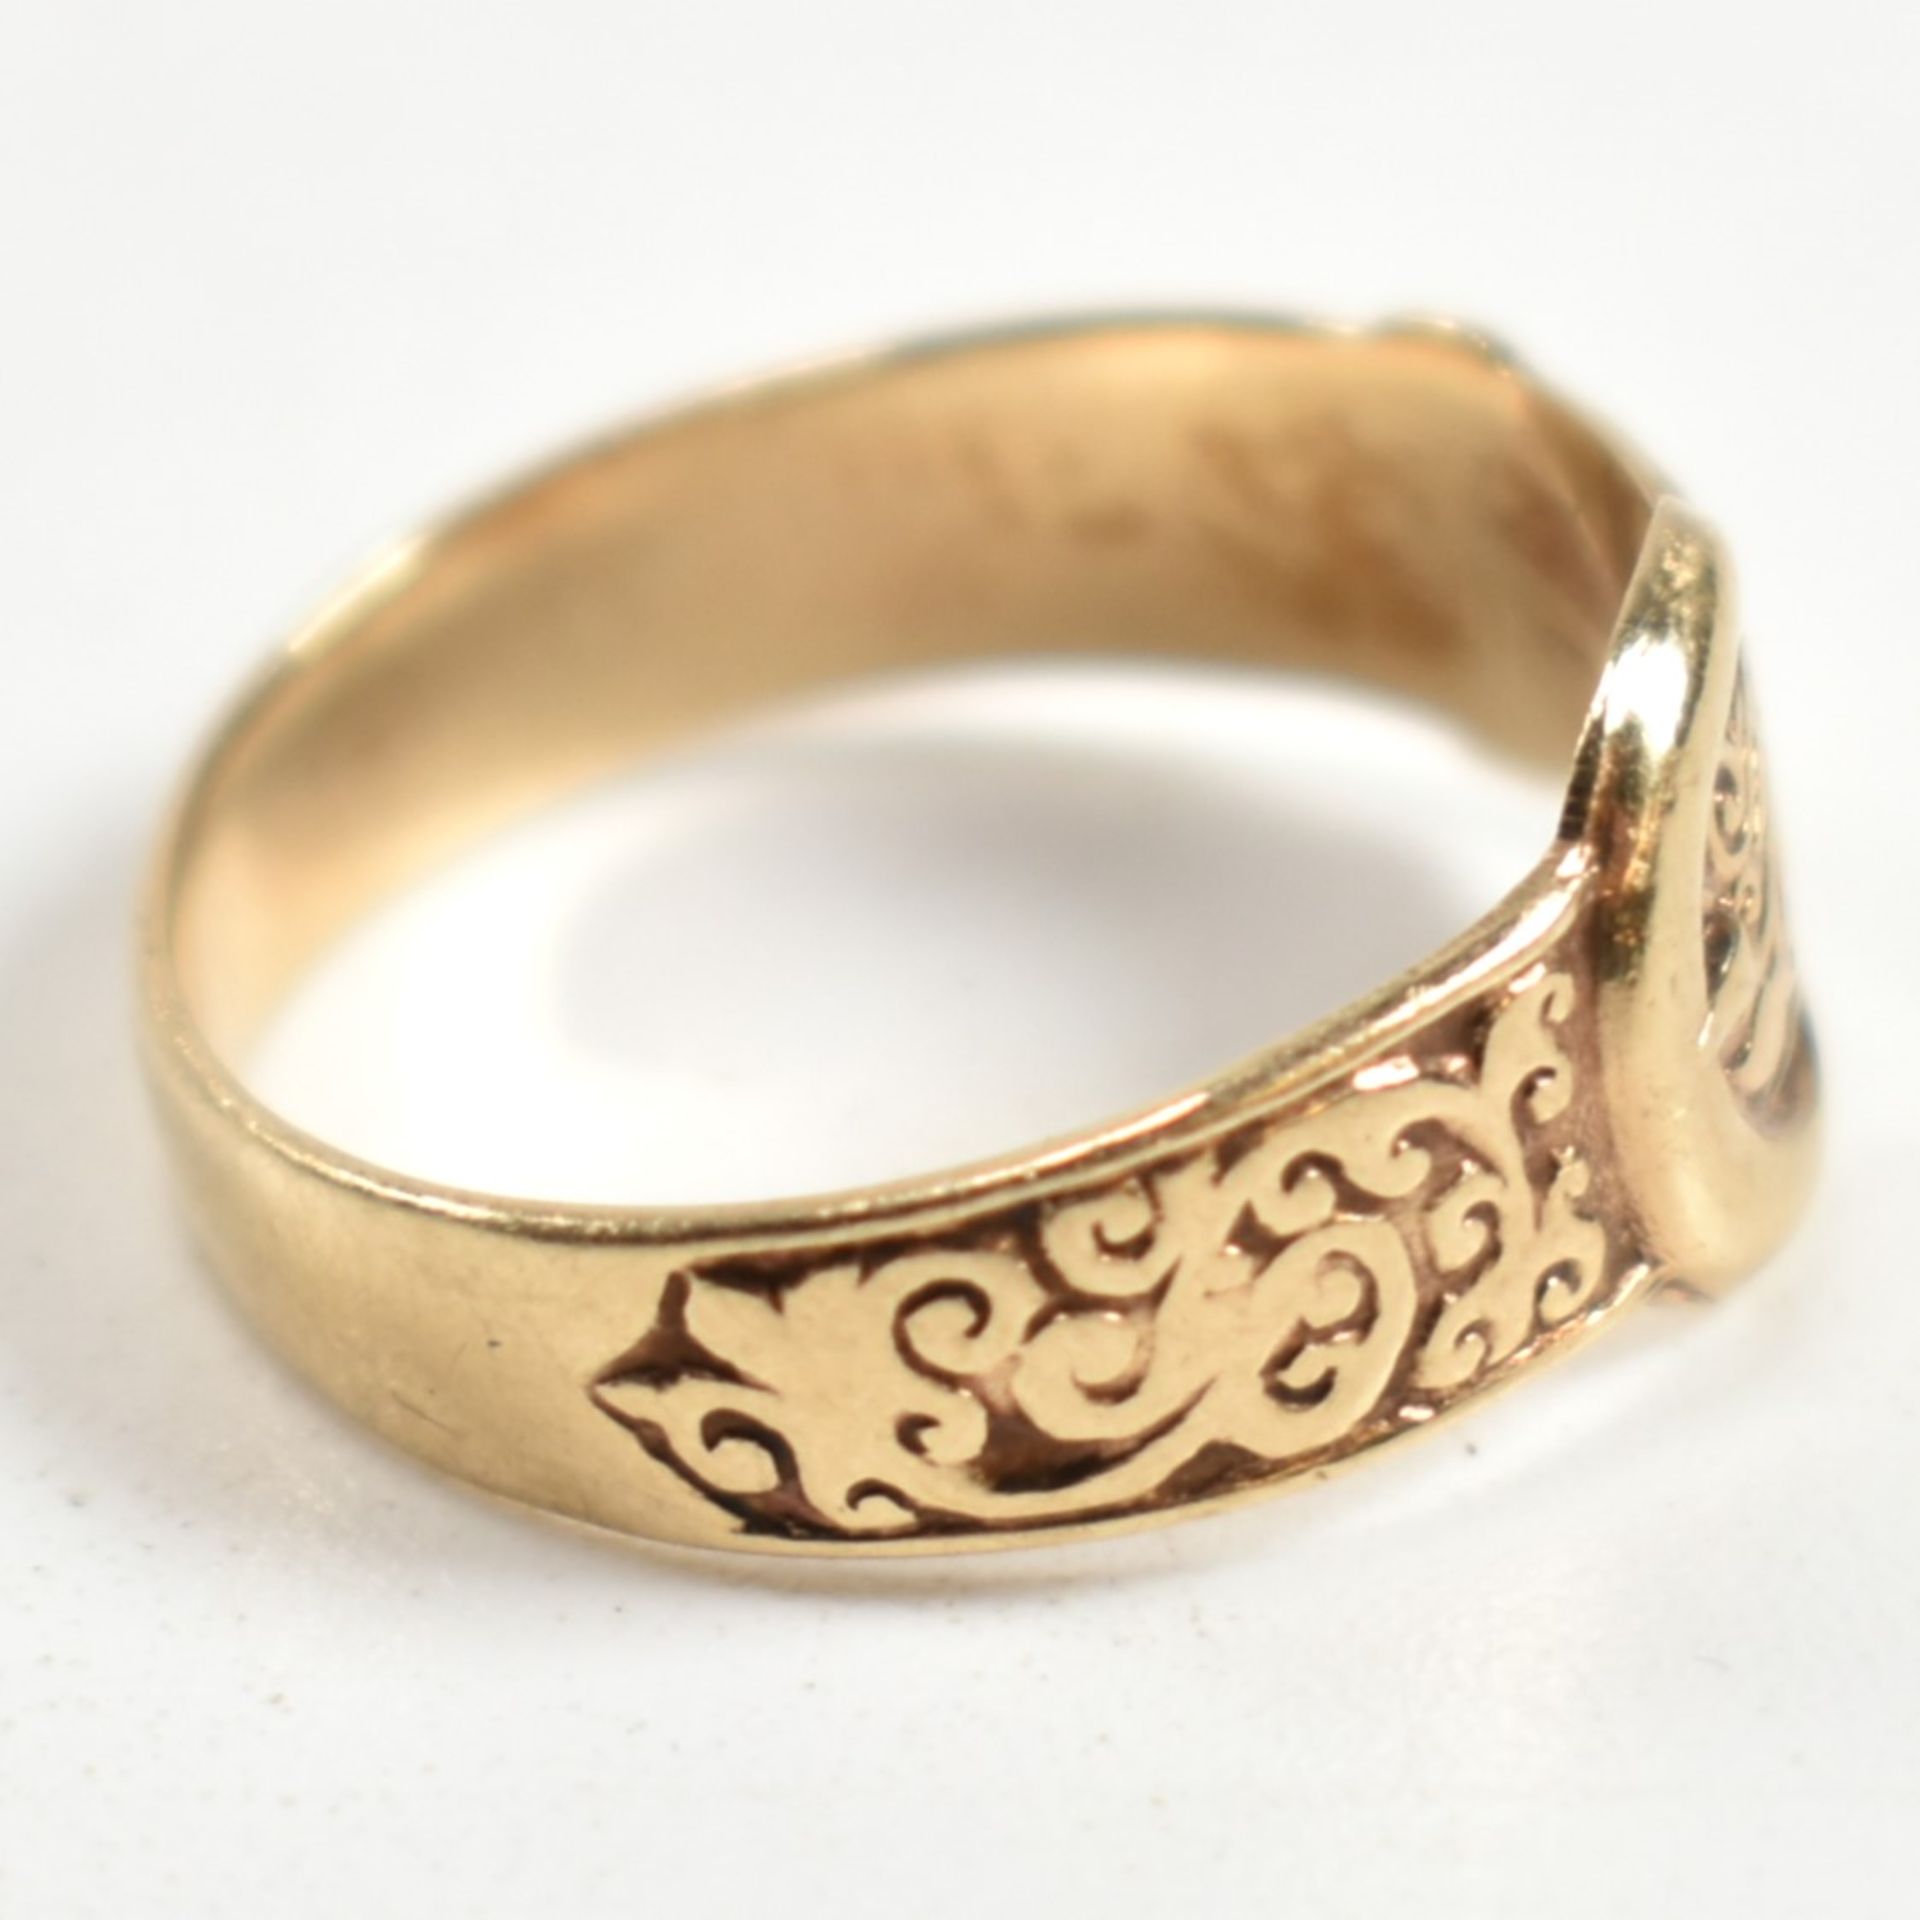 HALLMARKED 9CT GOLD ENGRAVED BELT BUCKLE RING - Image 6 of 9